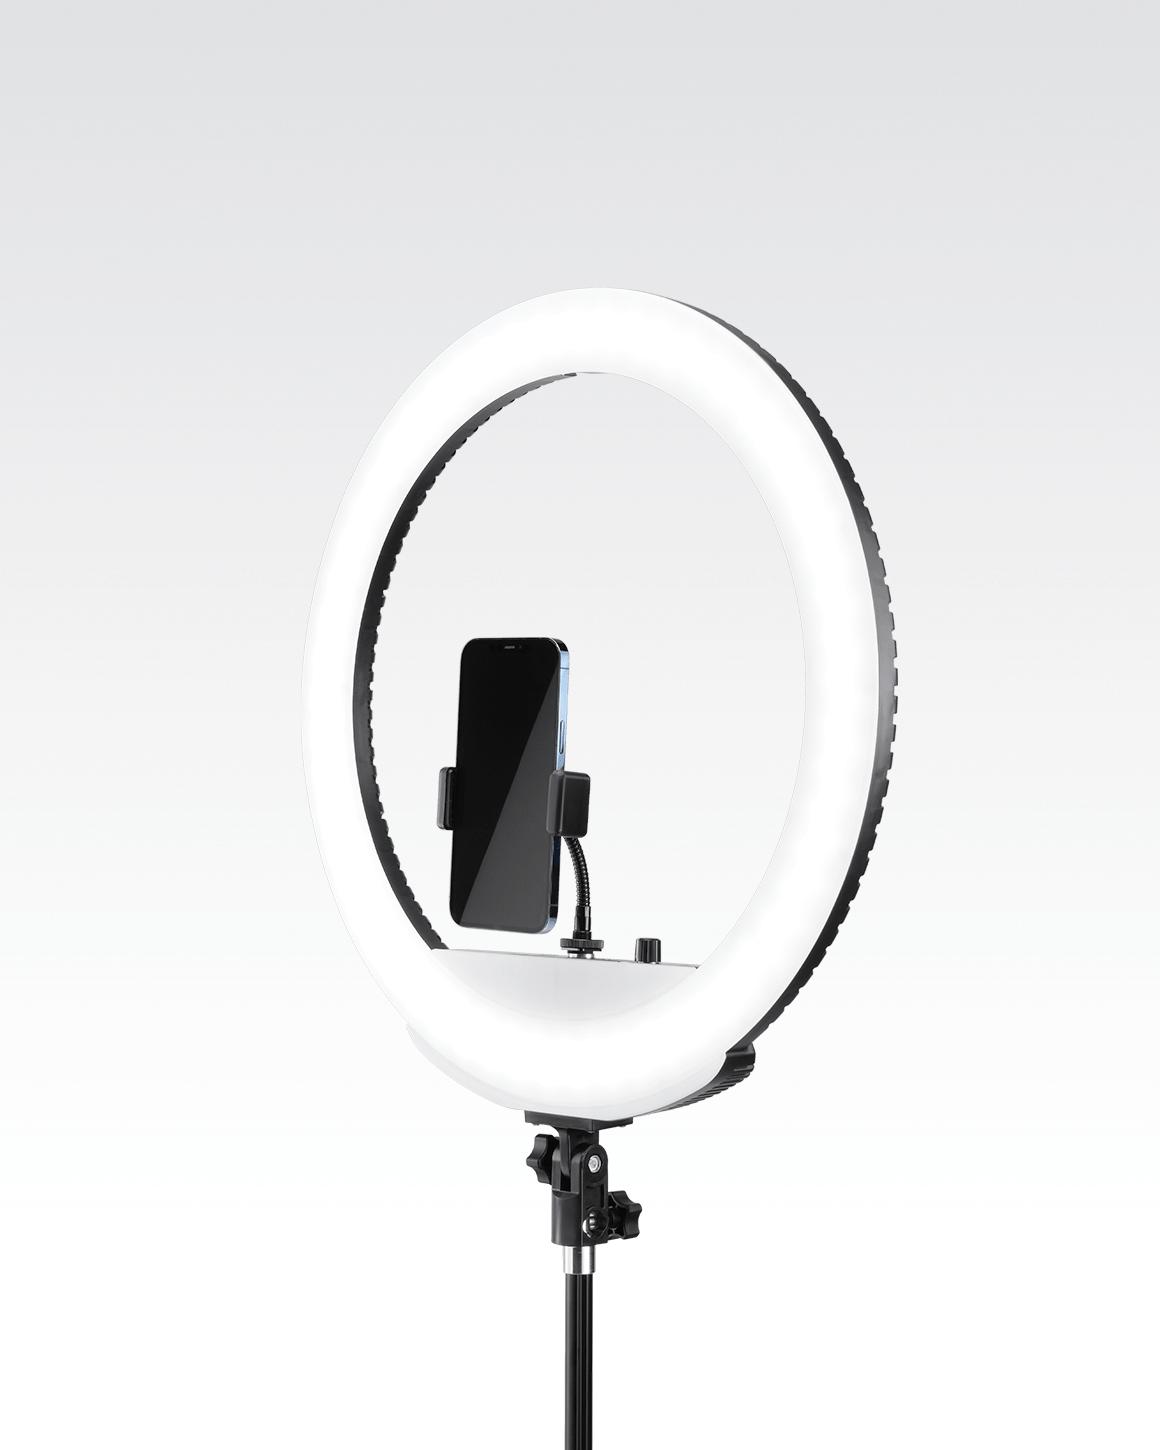 Lume Cube's Cordless 18" Ring Light with a smartphone attached in gooseneck mount.